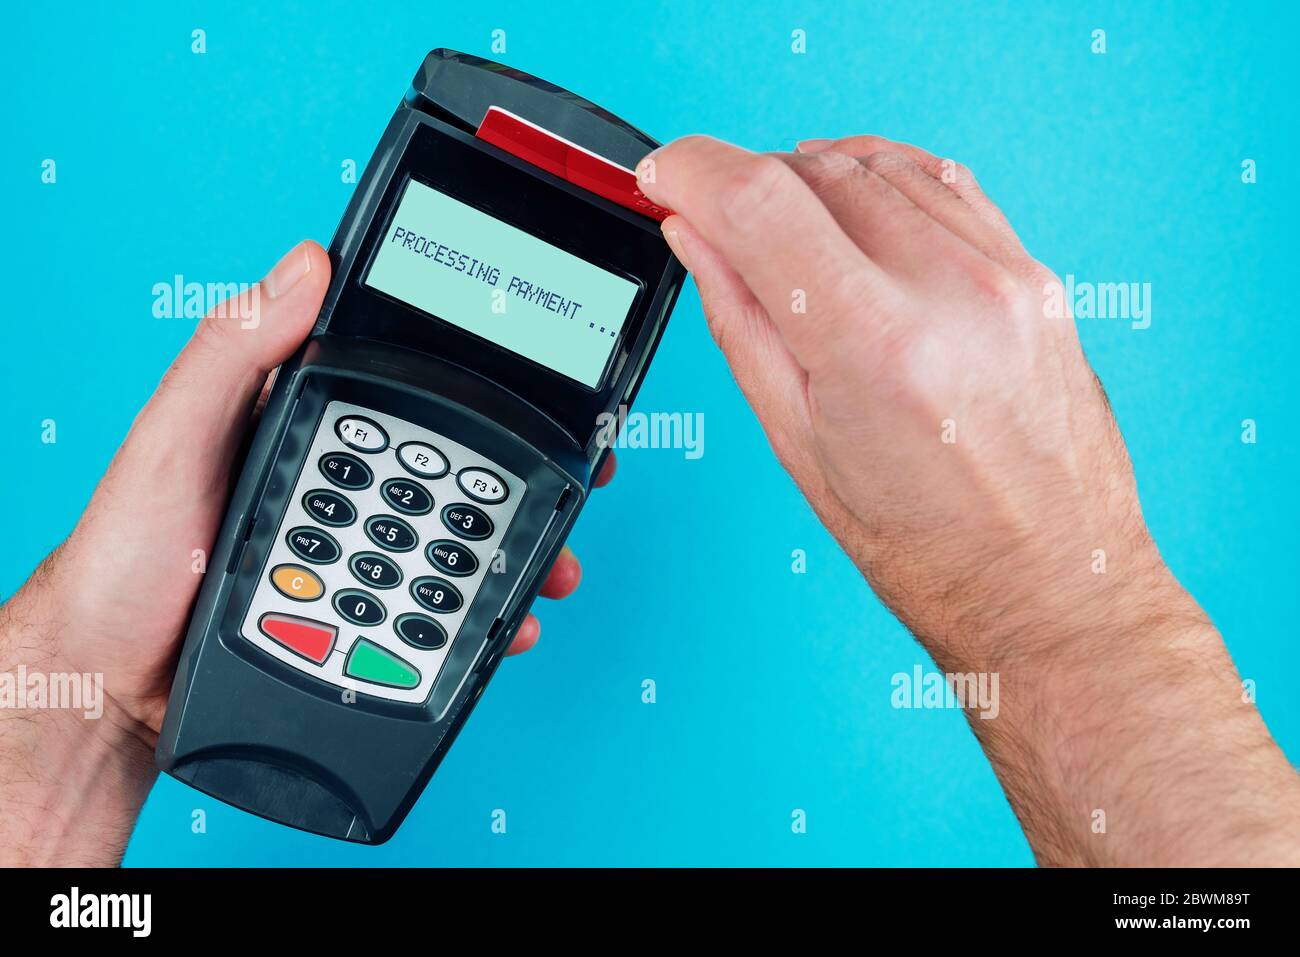 top view of person swiping credit card or debit card through POS payment terminal Stock Photo